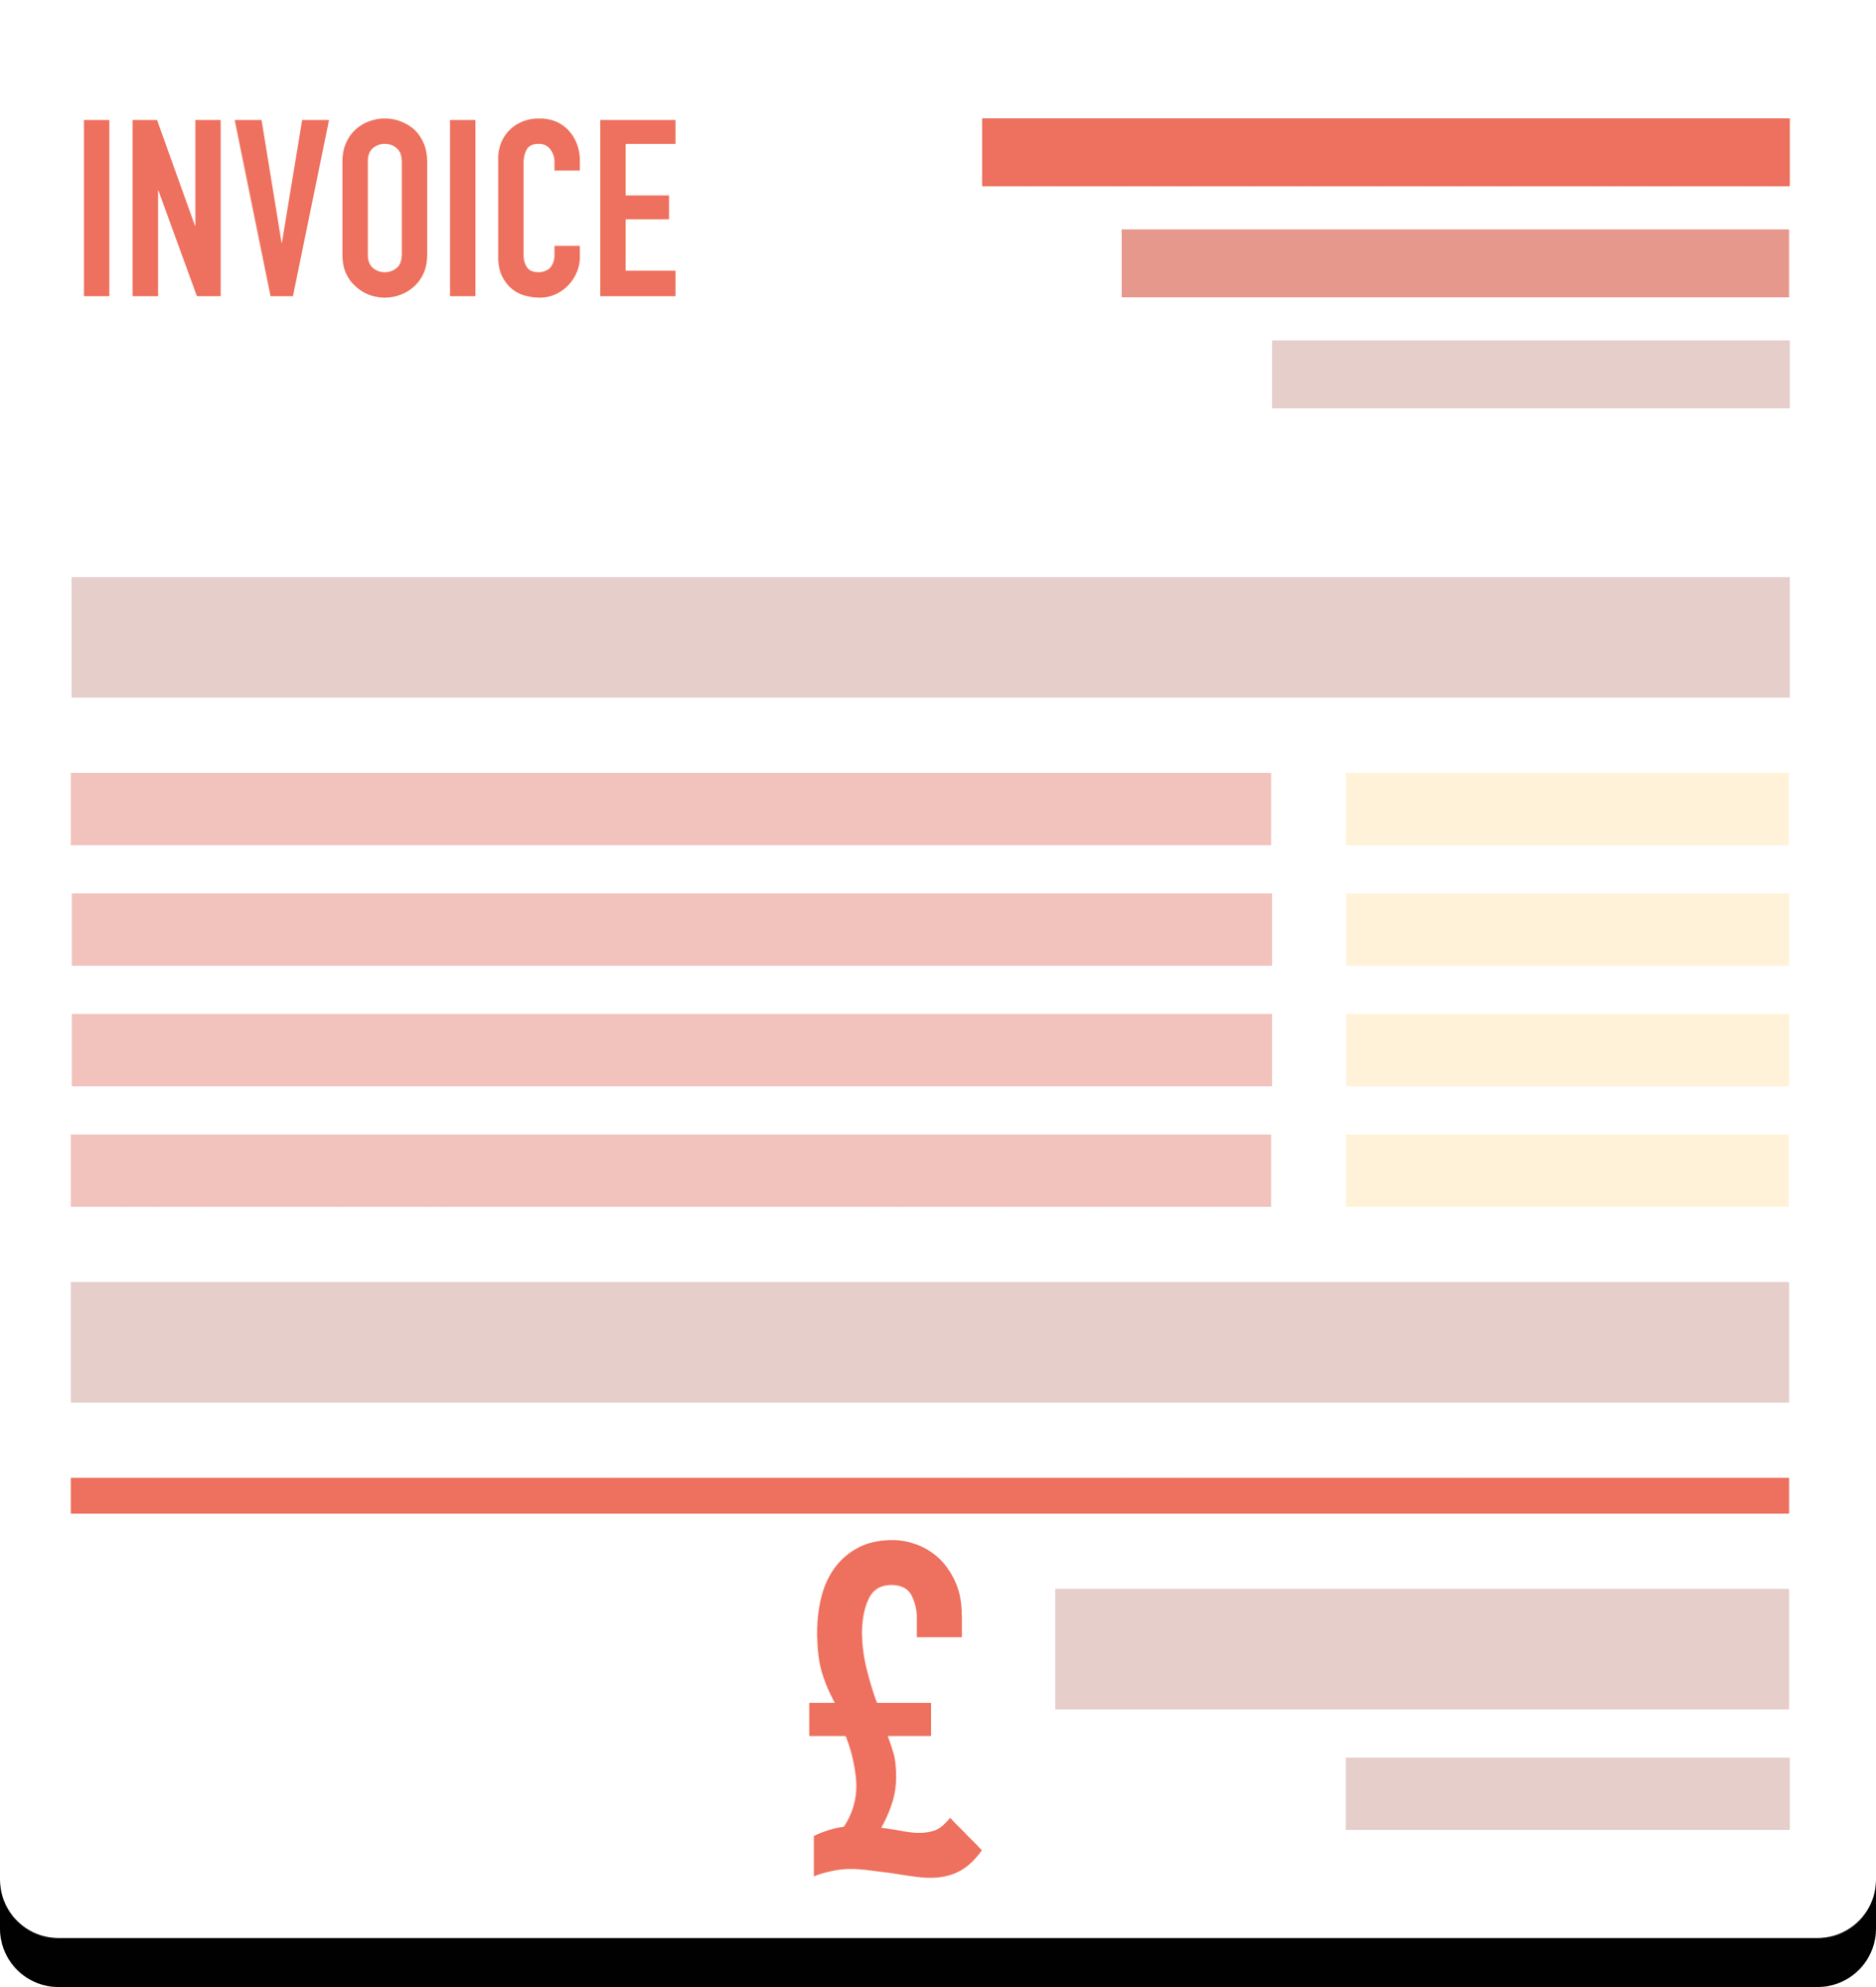 Invoice template for electricians